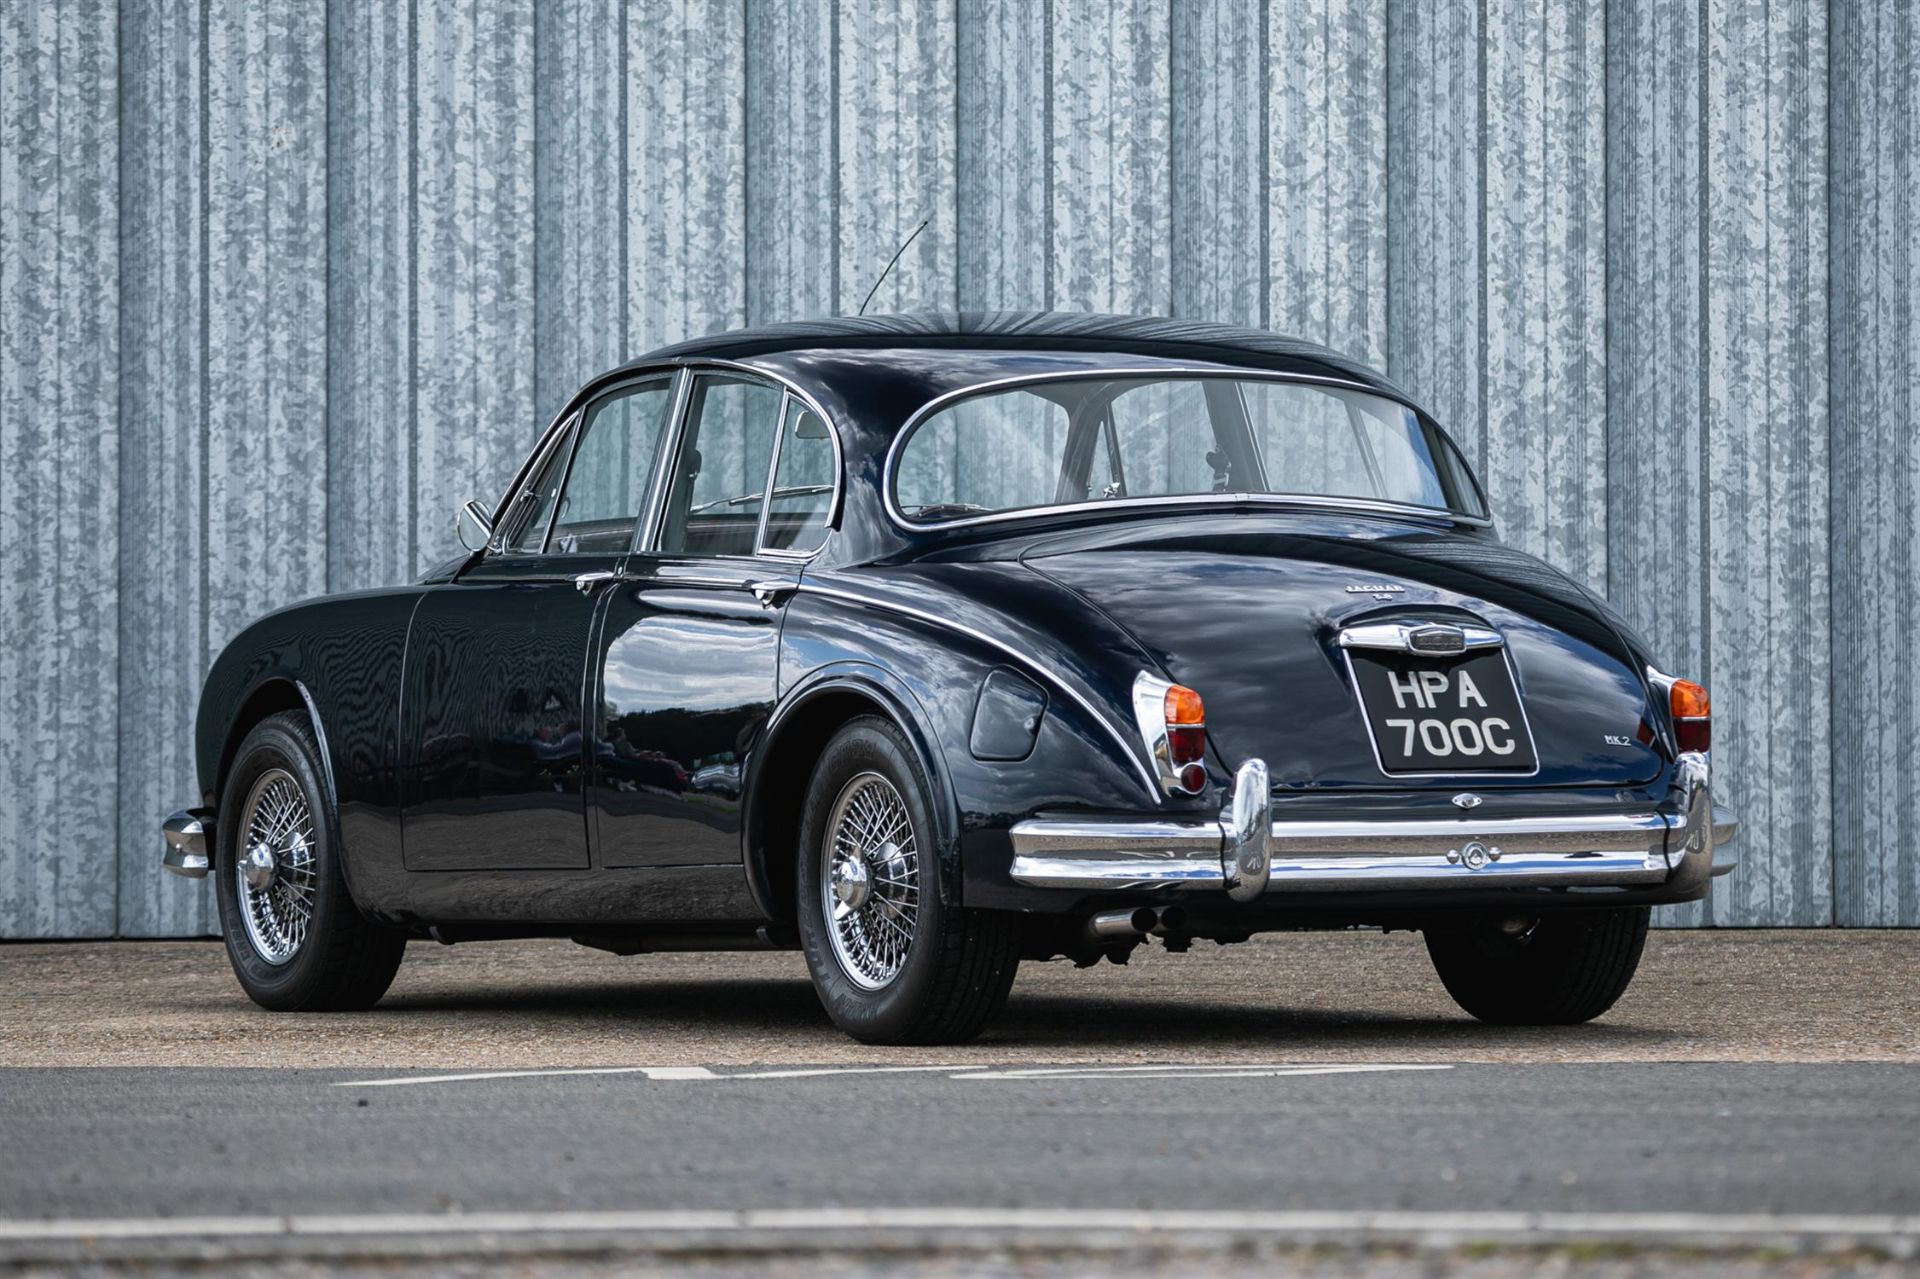 1964 Jaguar Mk2 3.8-Litre 'Coombs'-Style Sports Saloon - Image 4 of 10